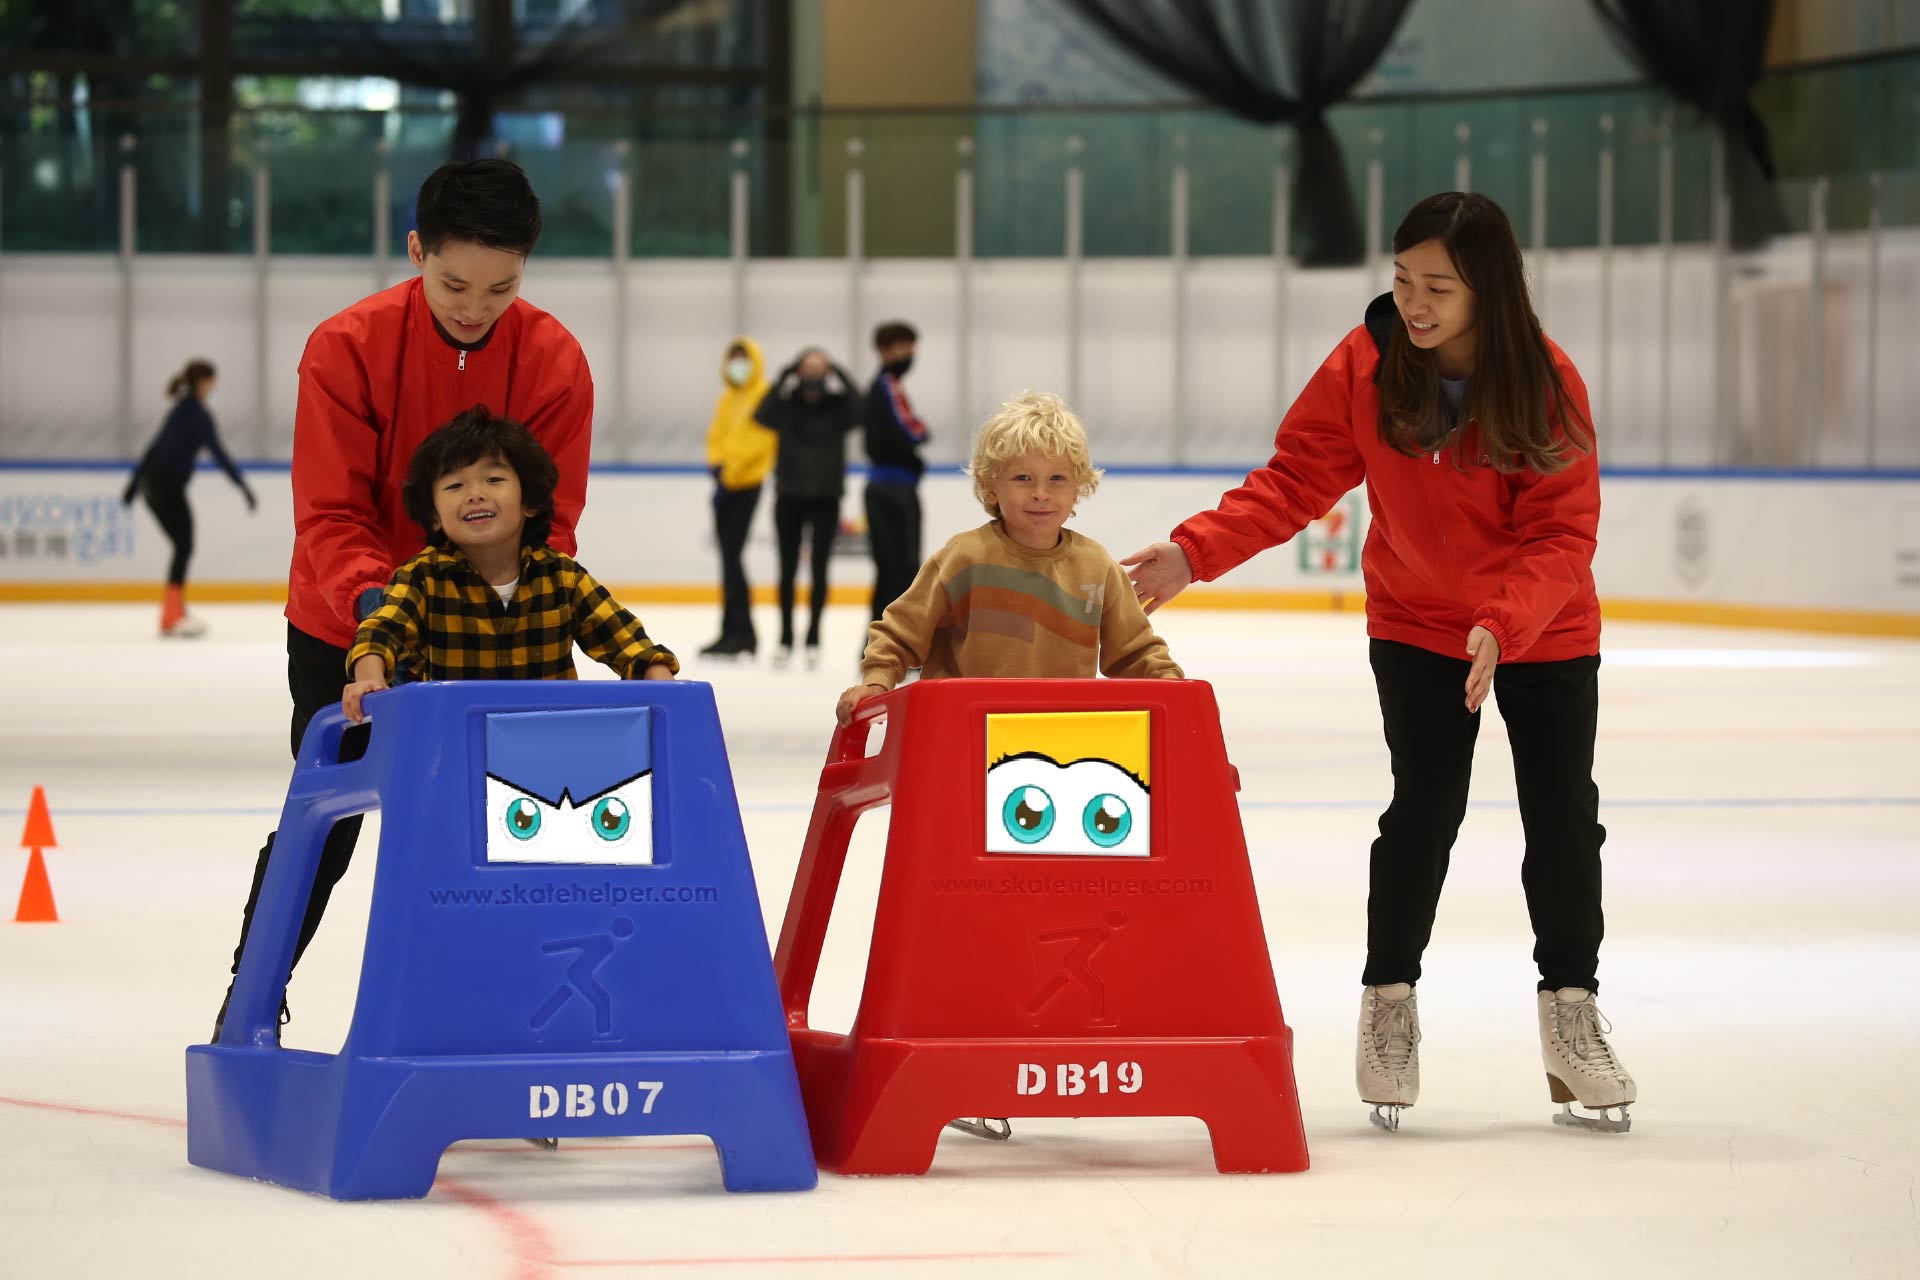 Taught by professional coaches, you can easily learn how to balance on ice and simple skating skills.